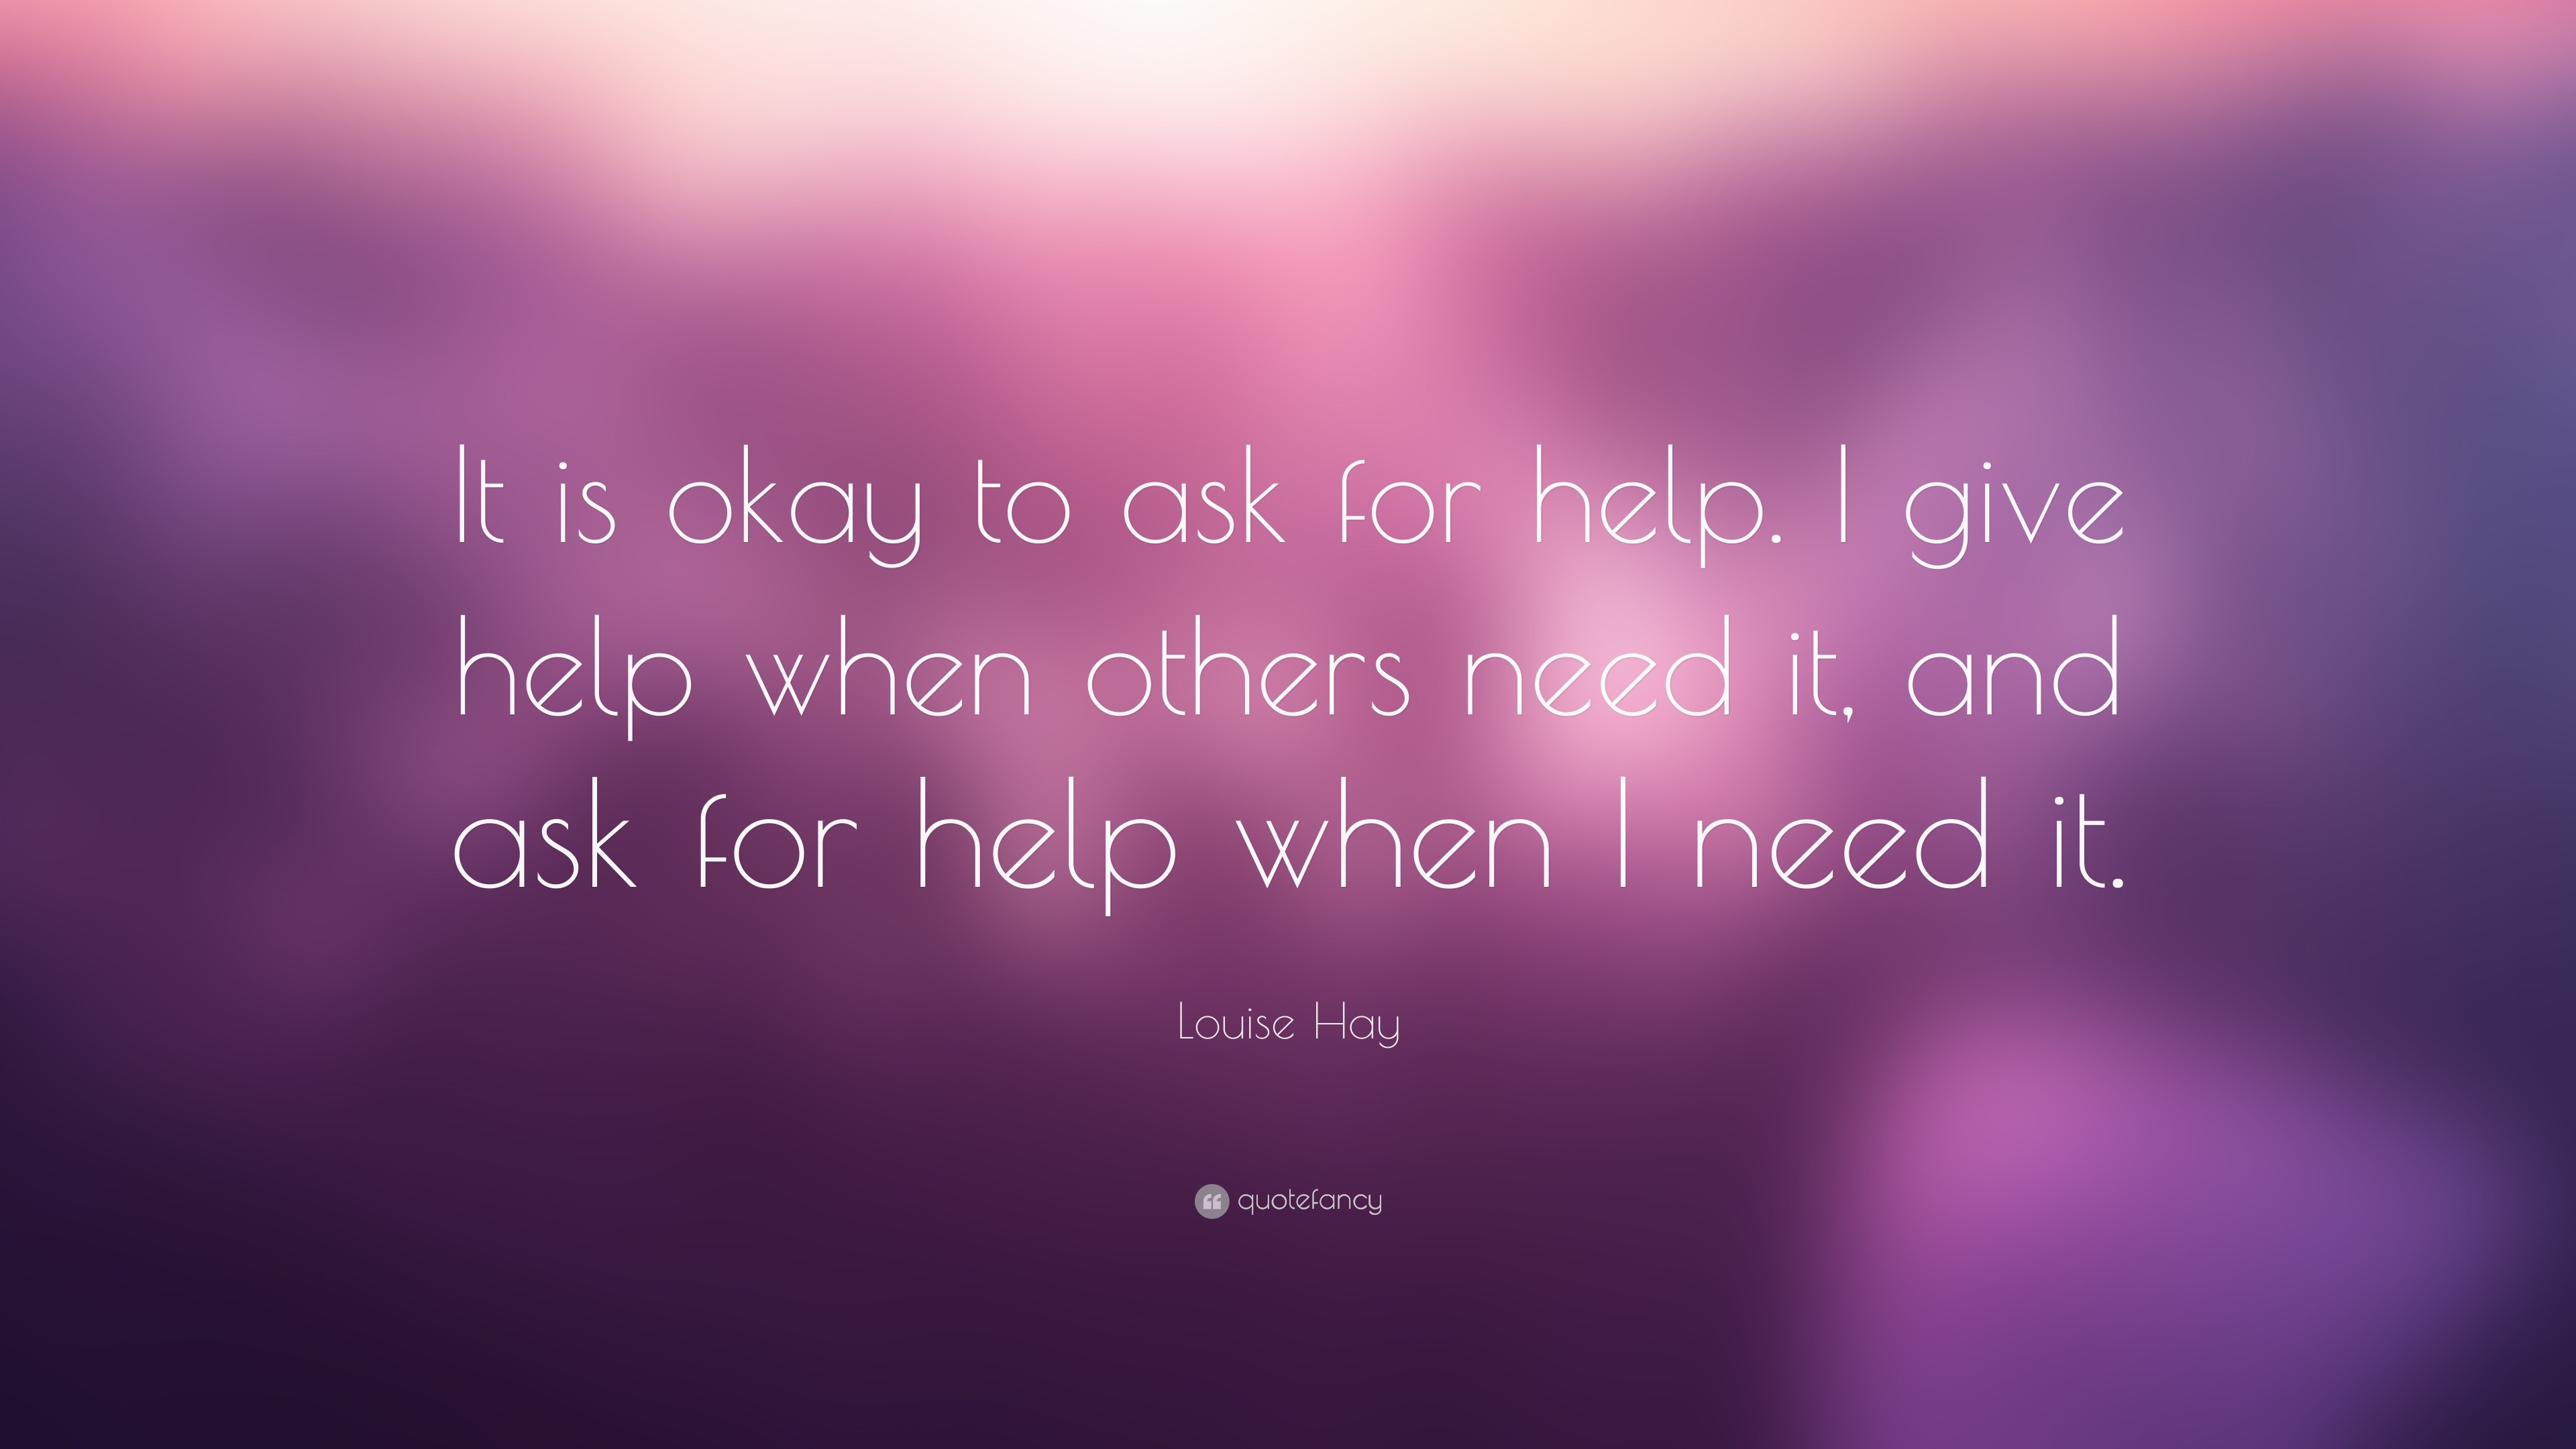 1788621 Louise Hay Quote It is okay to ask for help I give help when